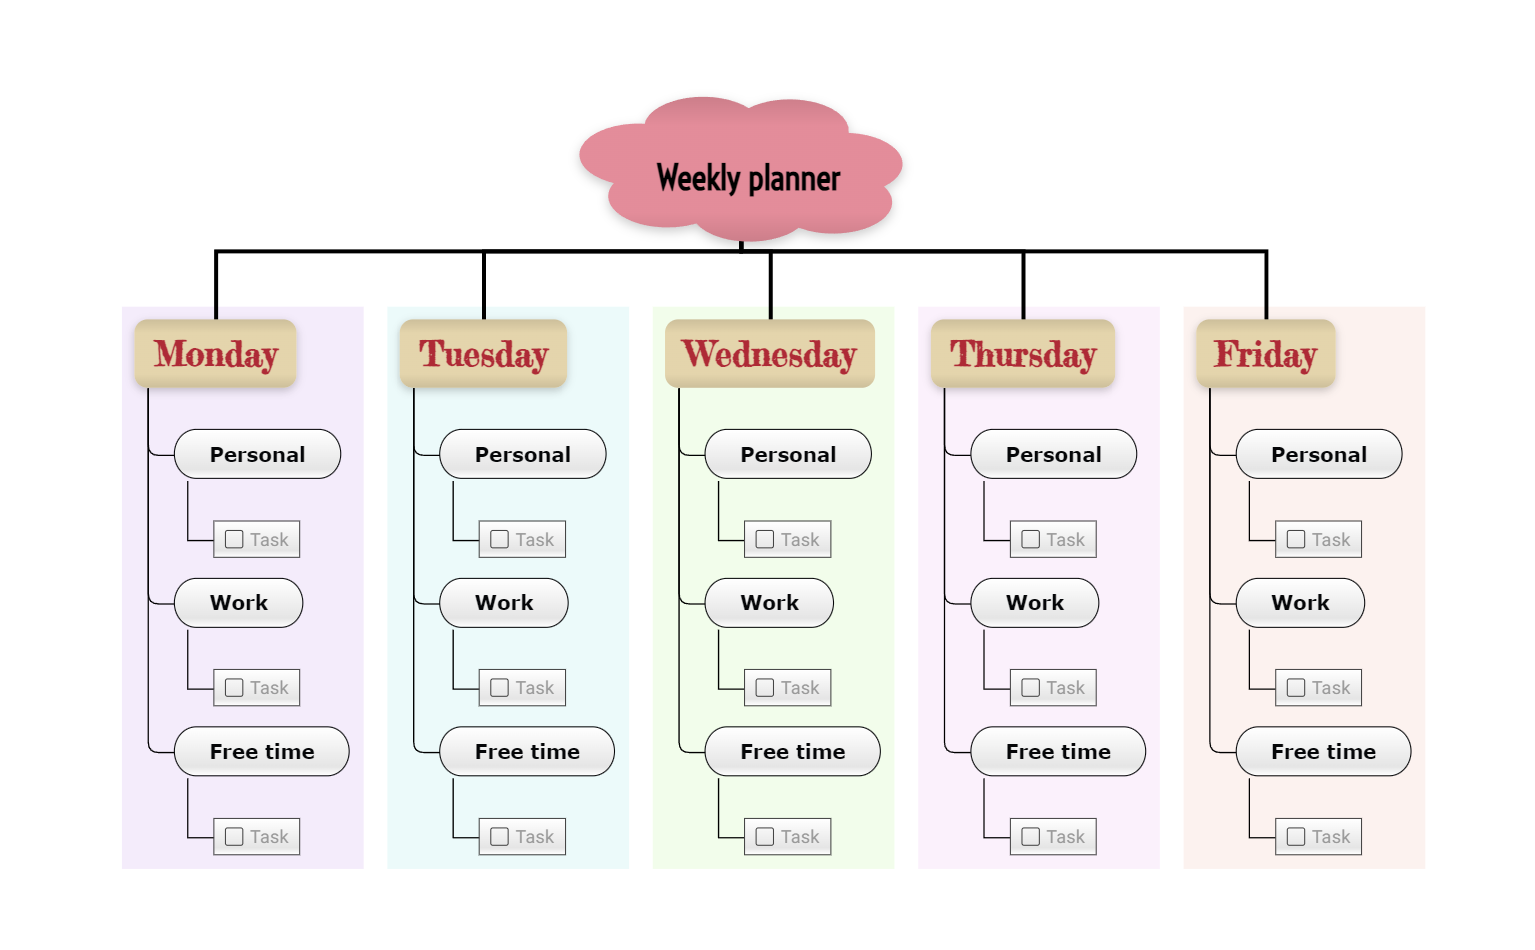 3 Weekly planner mind map template